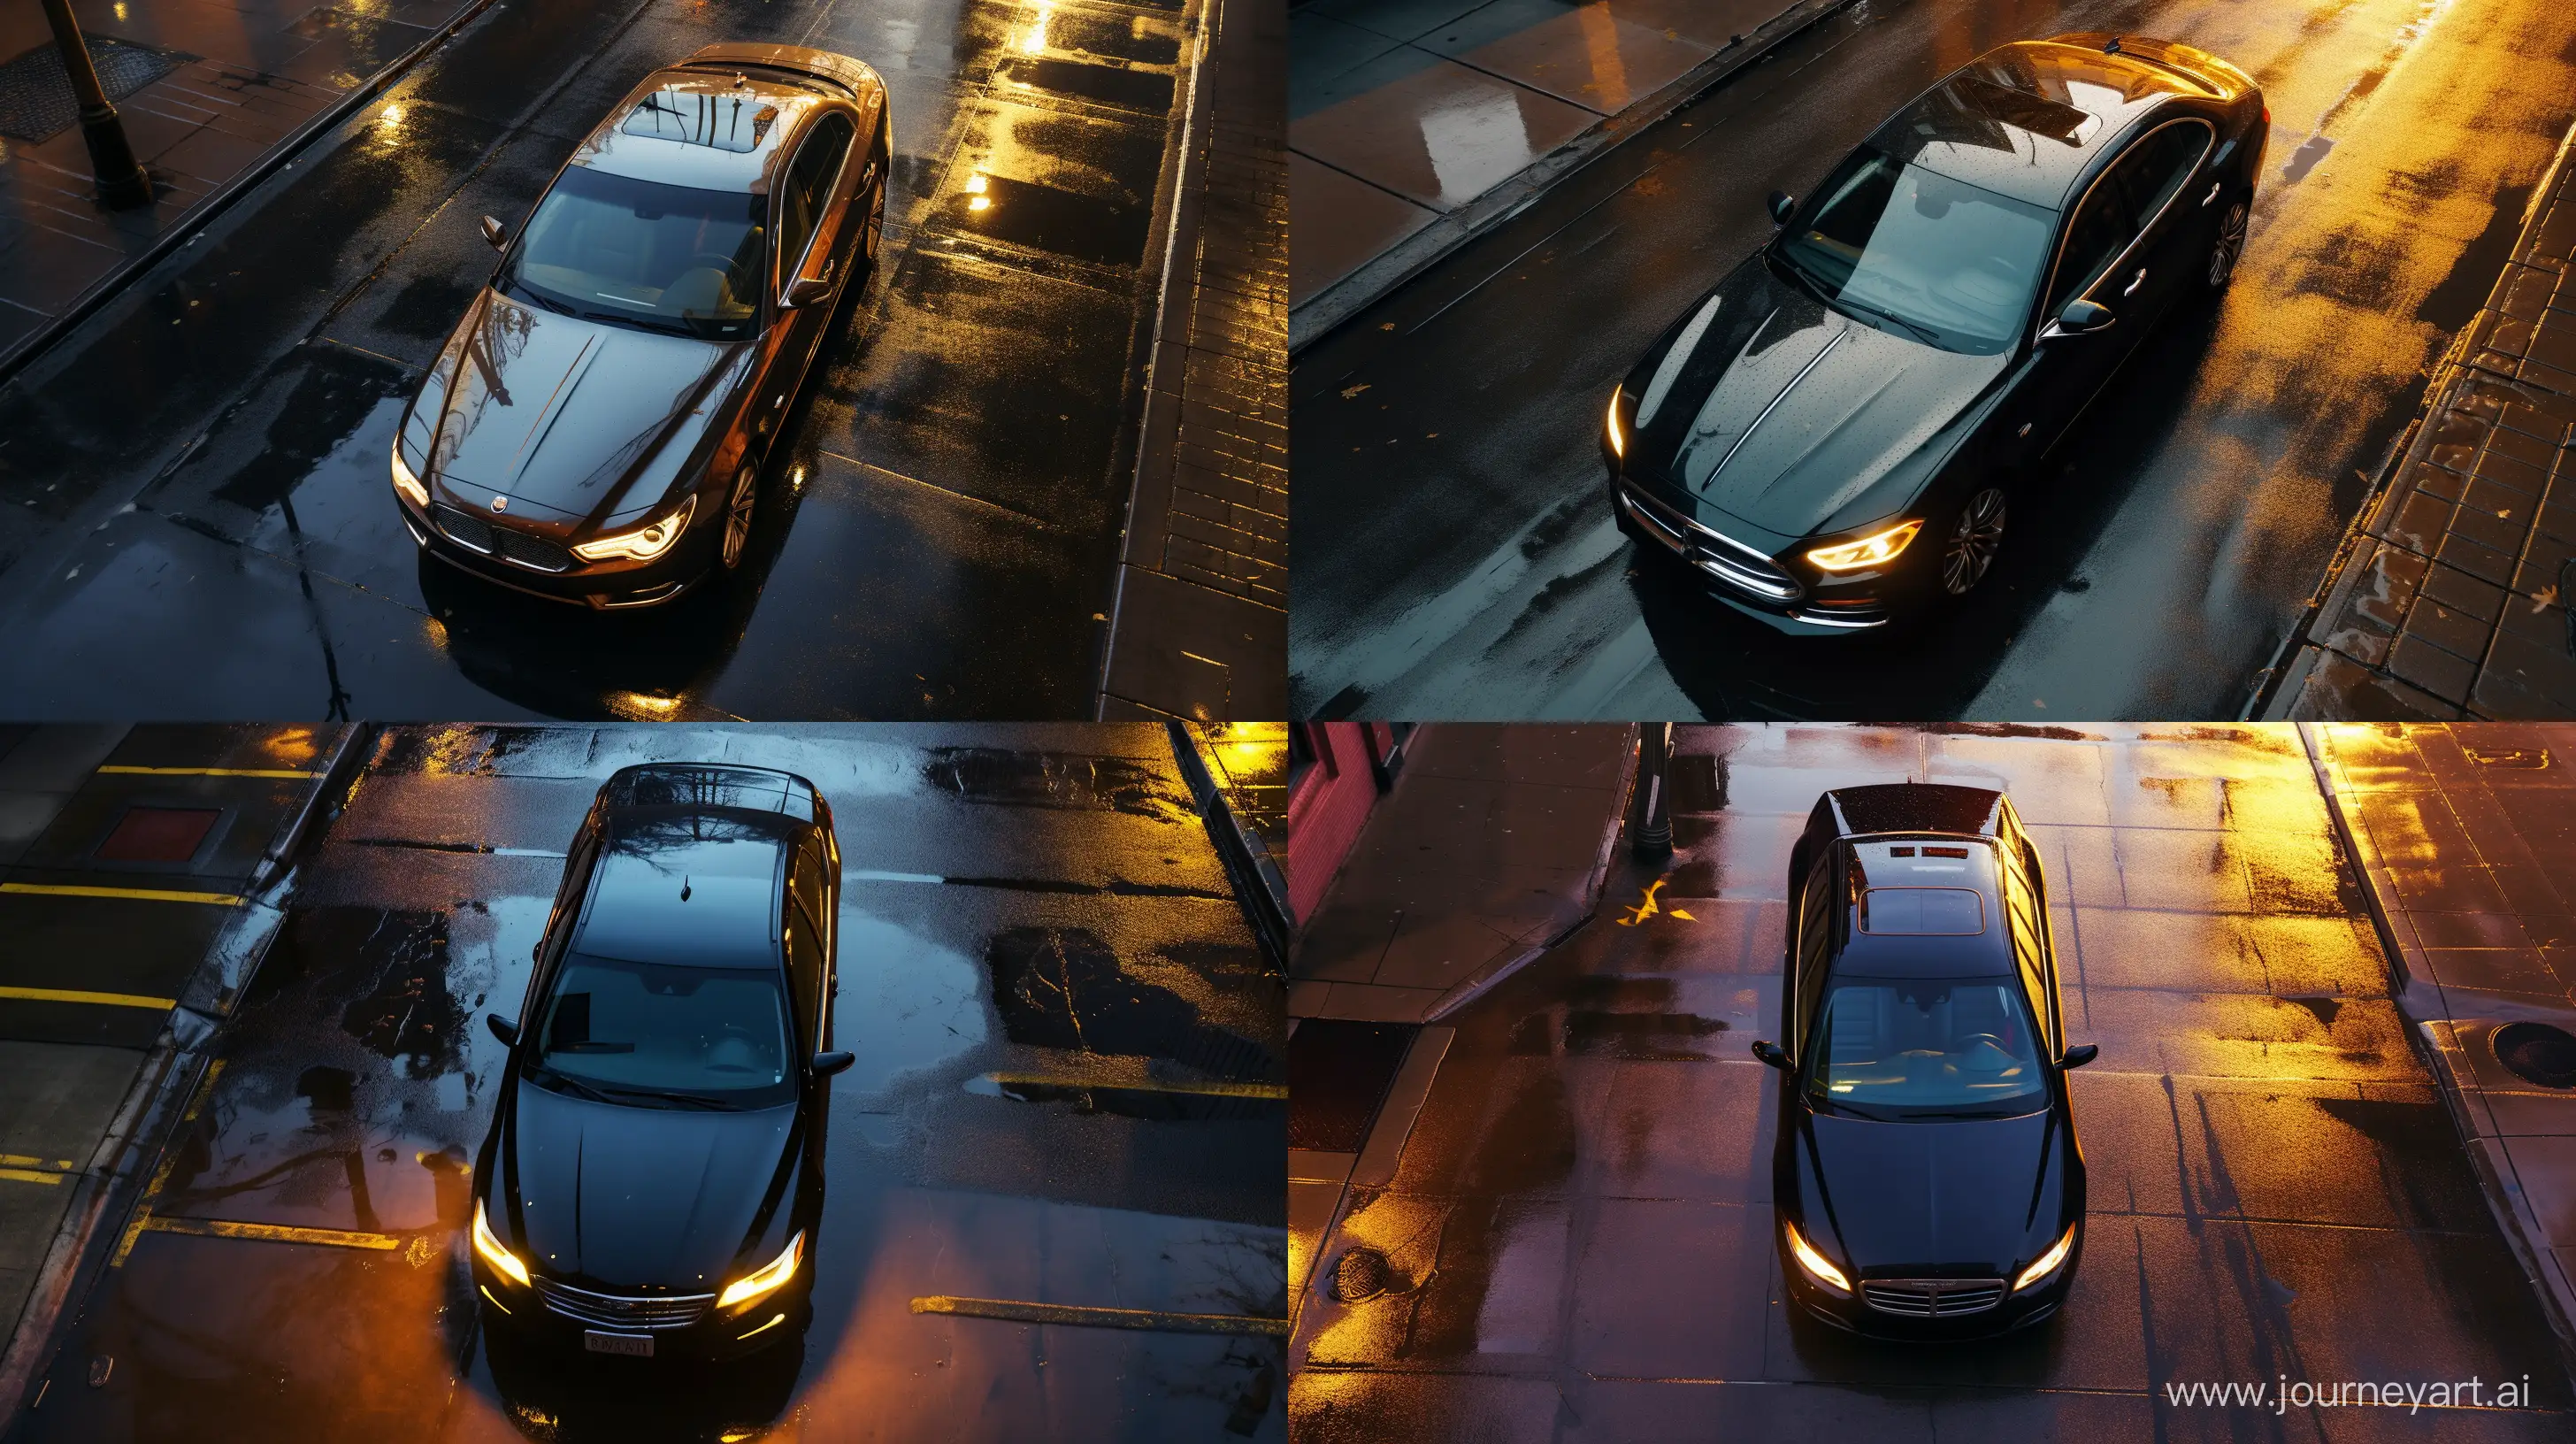 Drone view of a sleek, dark-colored car parked on a wet street, illuminated by the golden hues of the rising or setting sun. The car’s headlights are on, casting an intense glow that contrasts with its dark body. Reflections of buildings and the sky are visible on the car’s shiny surface. The street is wet, possibly from recent rain, and reflects the warm sunlight, creating an atmospheric mood. There is mist or smoke in the background, adding to the dramatic effect of the scene. An urban environment with tall buildings on both sides of the street. --ar 16:9